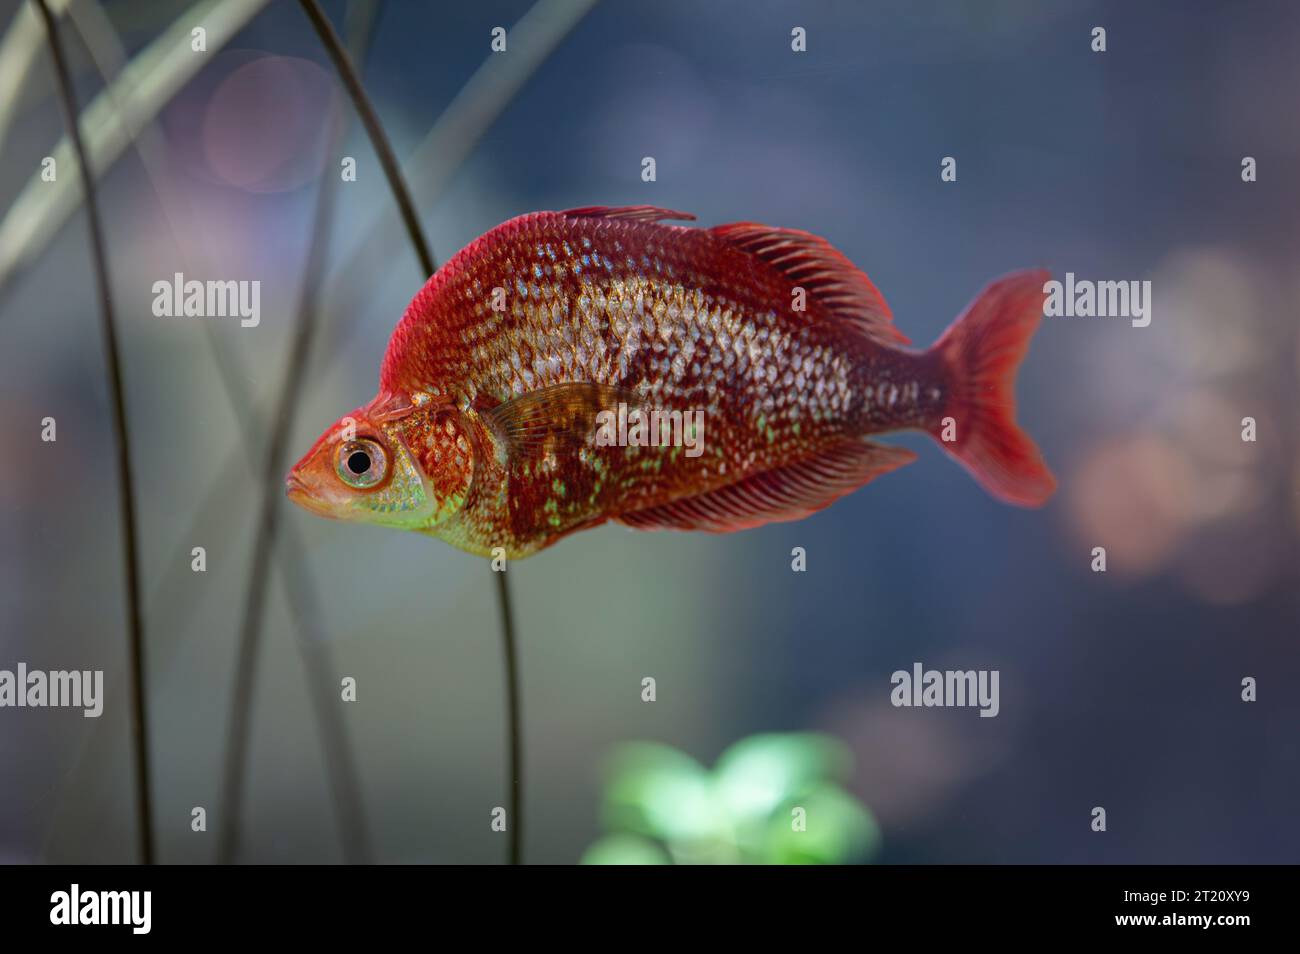 red rainbow fish, technically Glossolepis incisus, freshwater actinopterygian fish Stock Photo